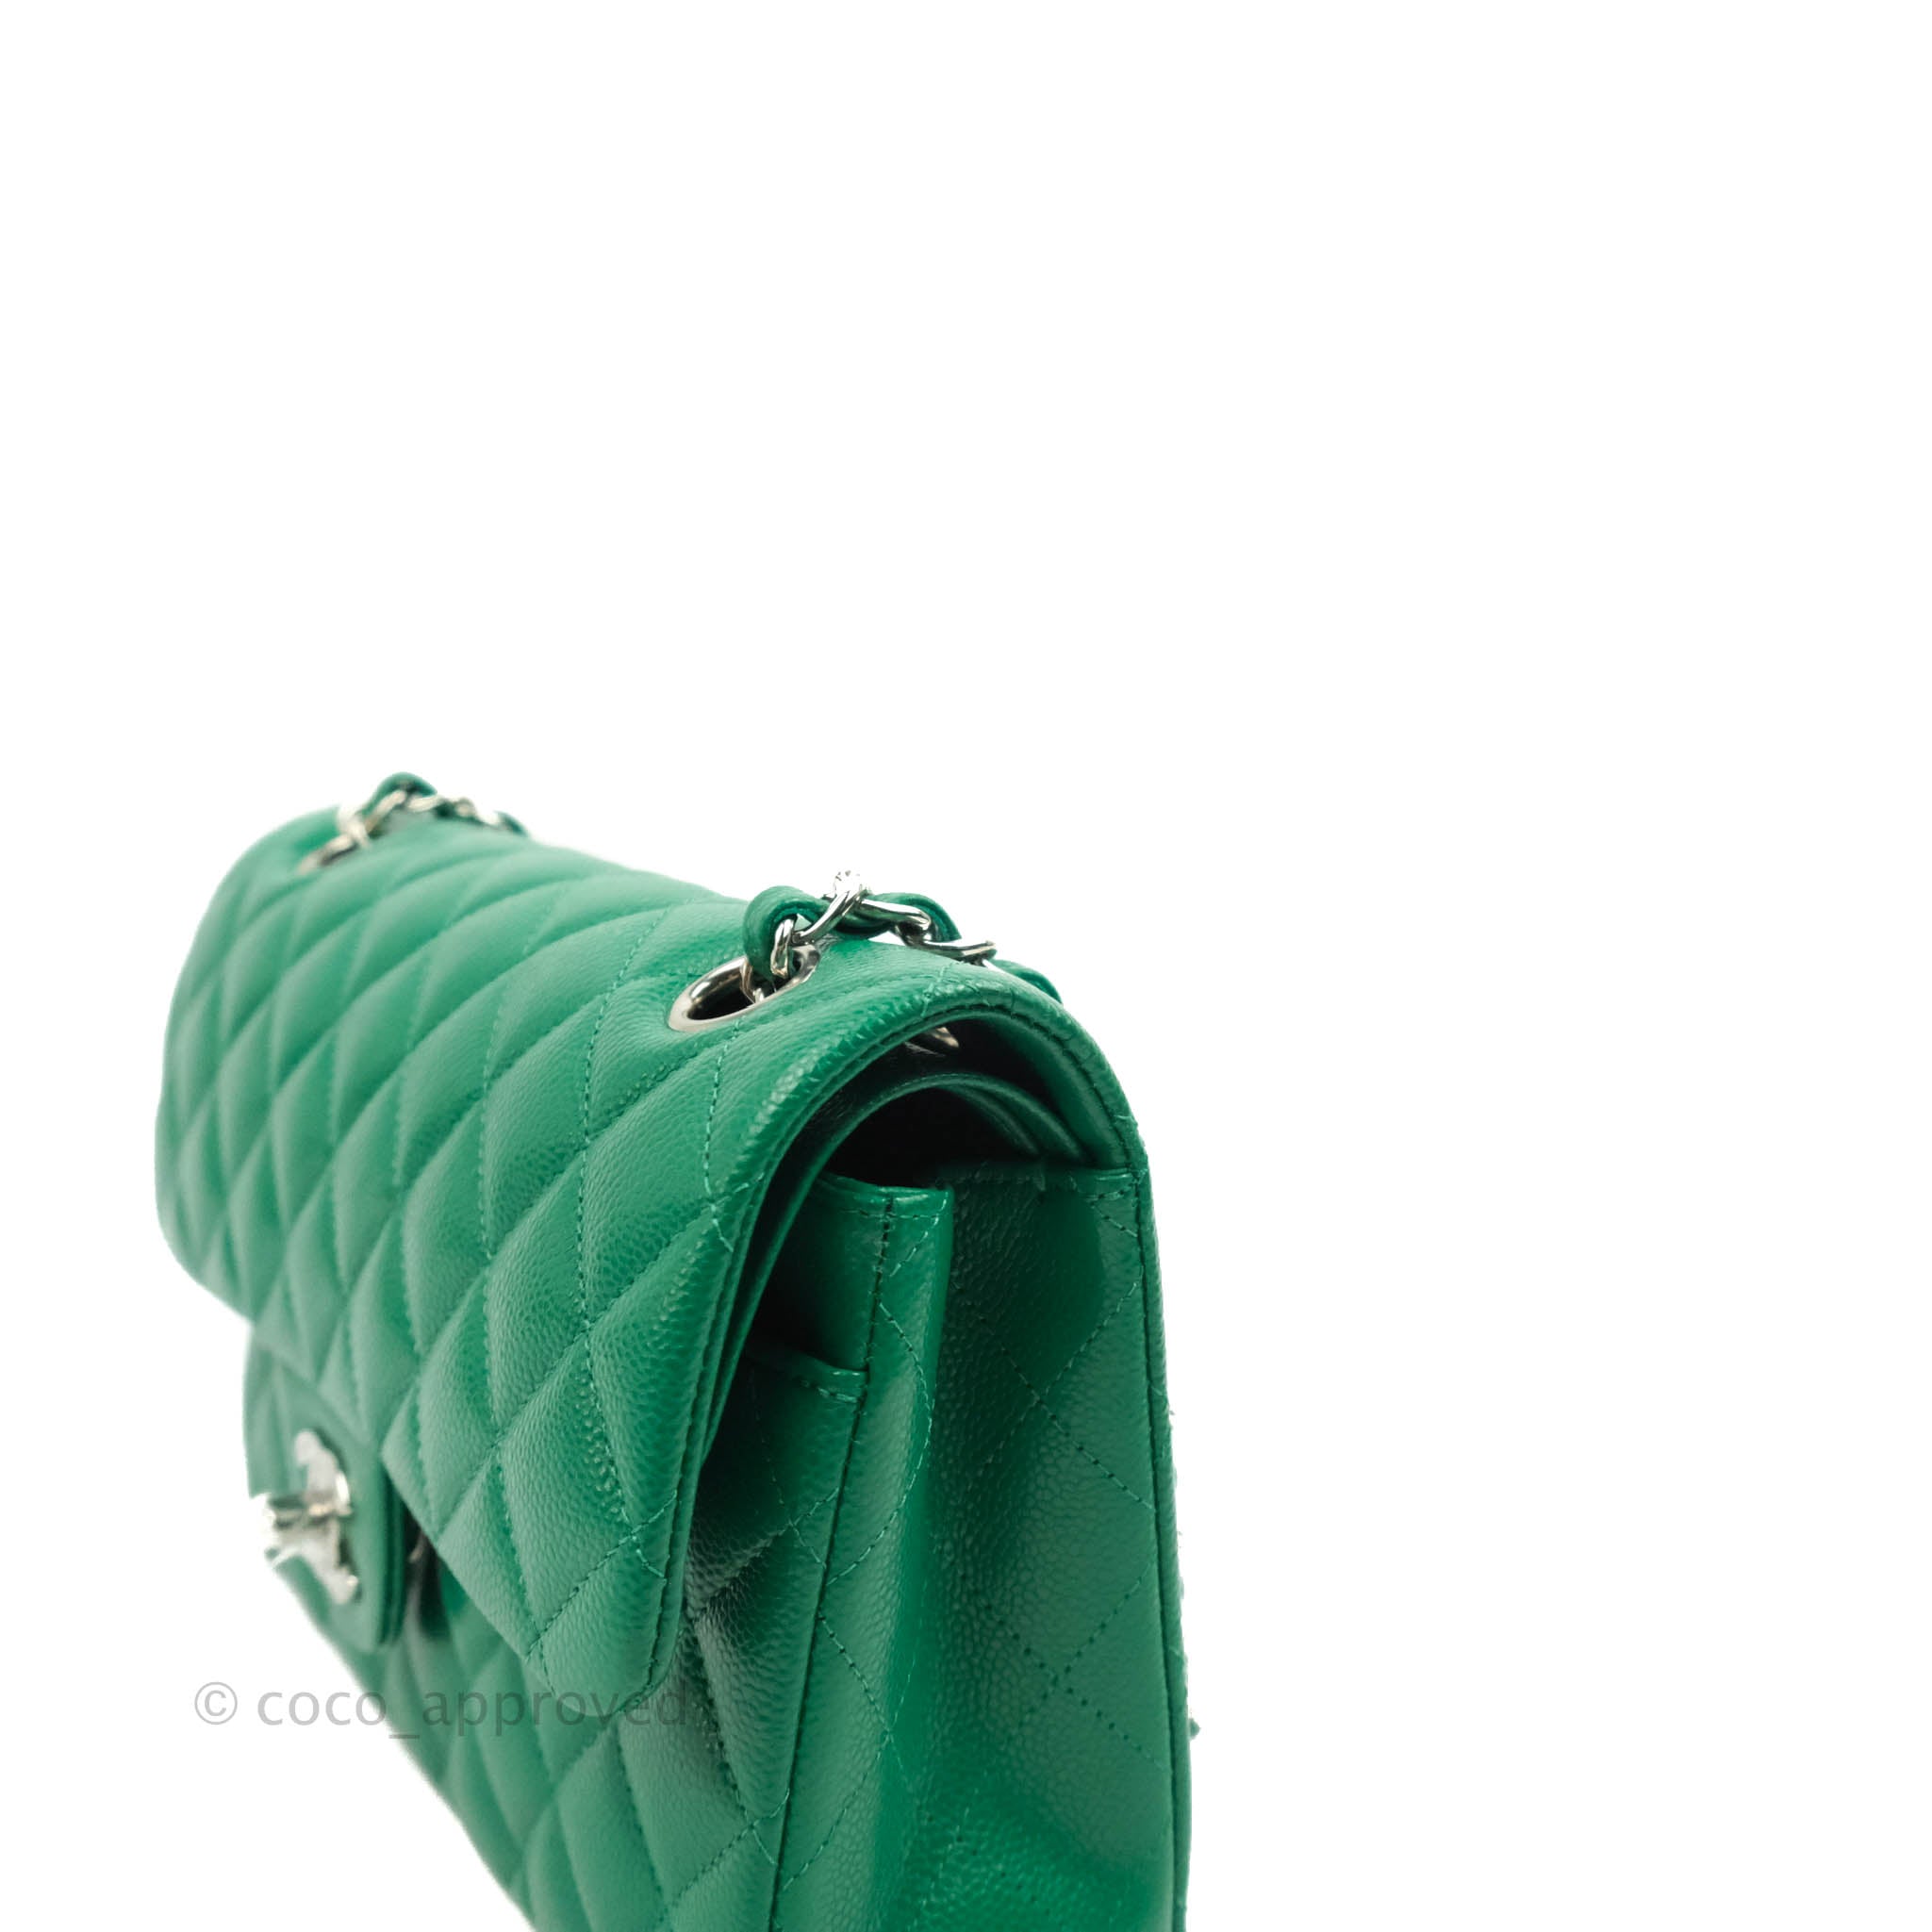 Sold at Auction: Chanel Emerald Green Quilted Lambskin 19 Bag W/Box